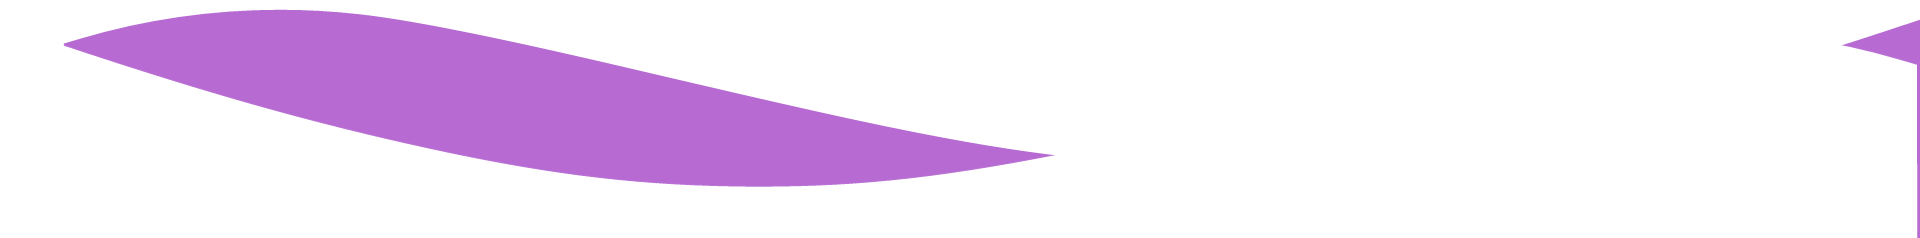 a purple object is floating in the air on a white background .